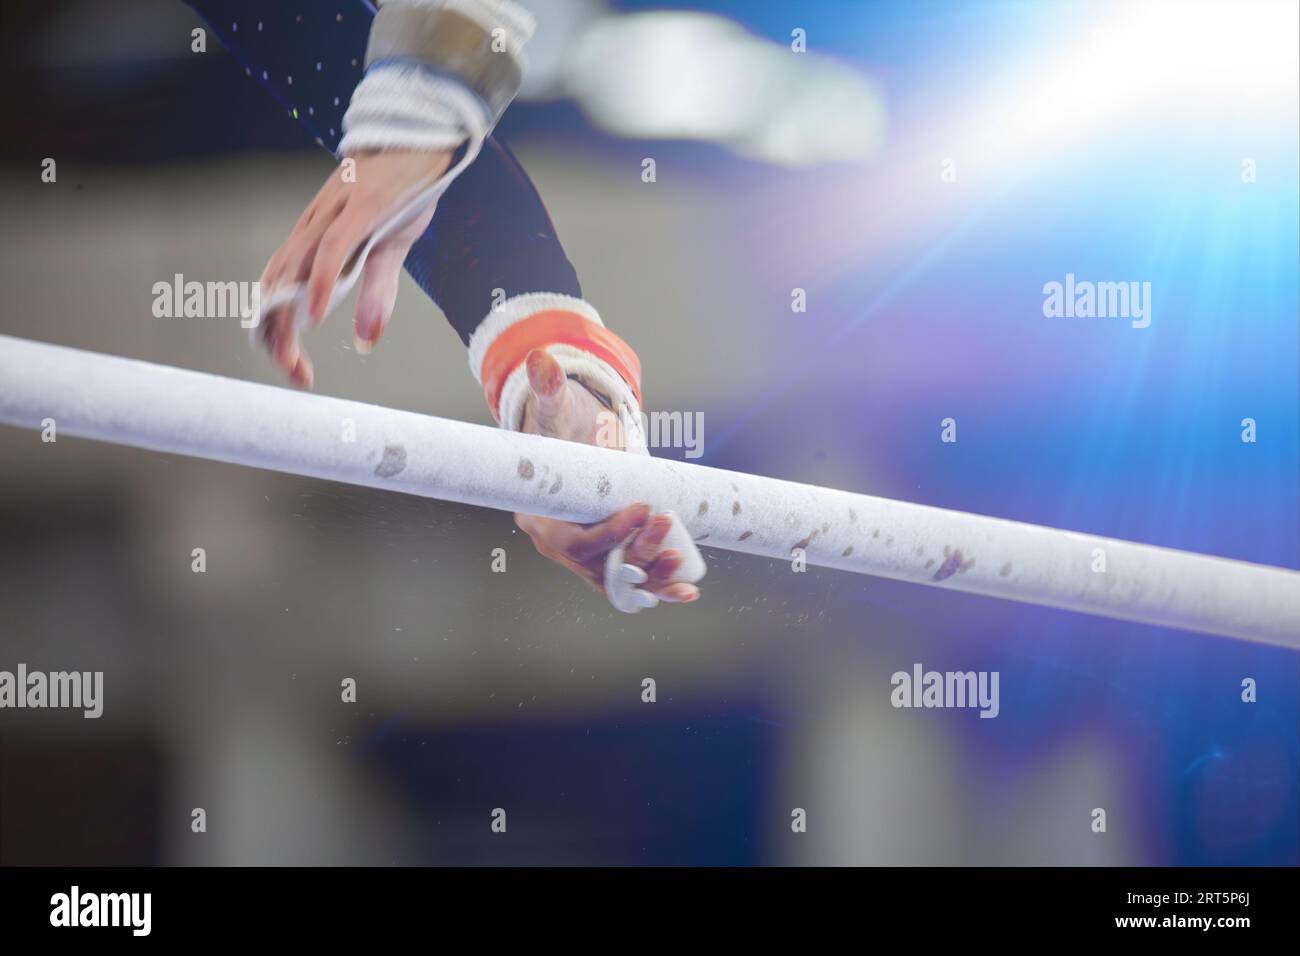 20 Facts About Uneven Parallel Bars 